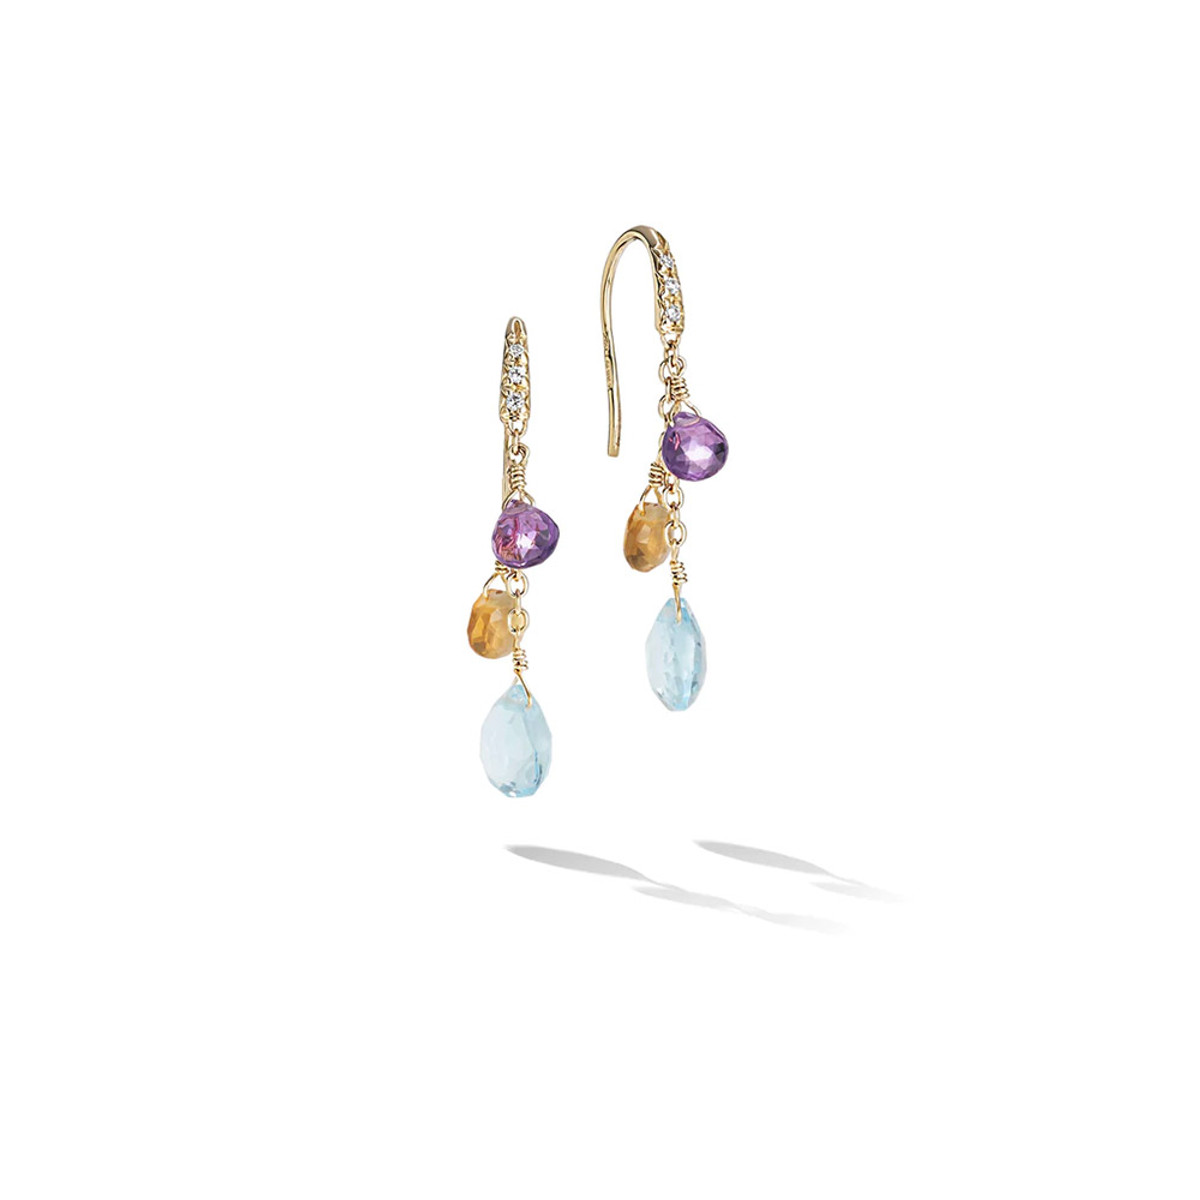 Marco Bicego Paradise 18K Yellow Gold Gemstone Earrings With Diamonds, Blue Topaz Accents-54721 Product Image